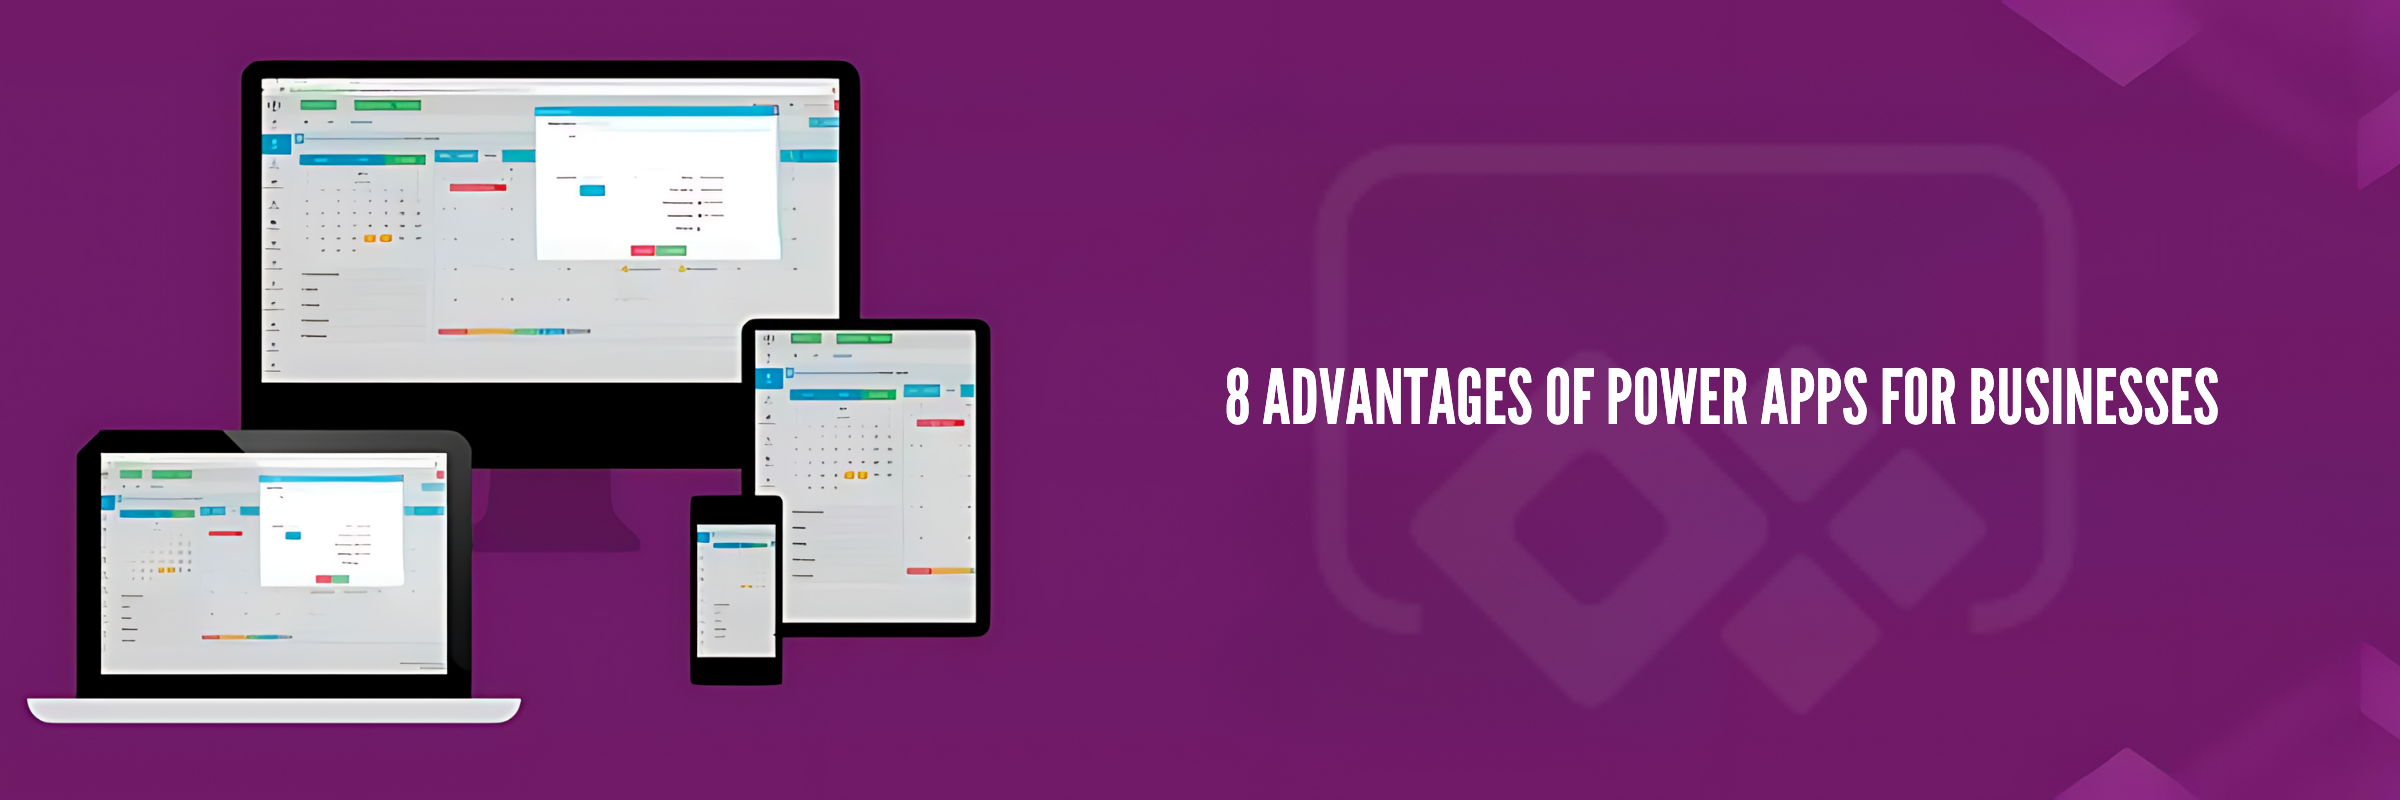 8 Advantages of Power Apps For Businesses